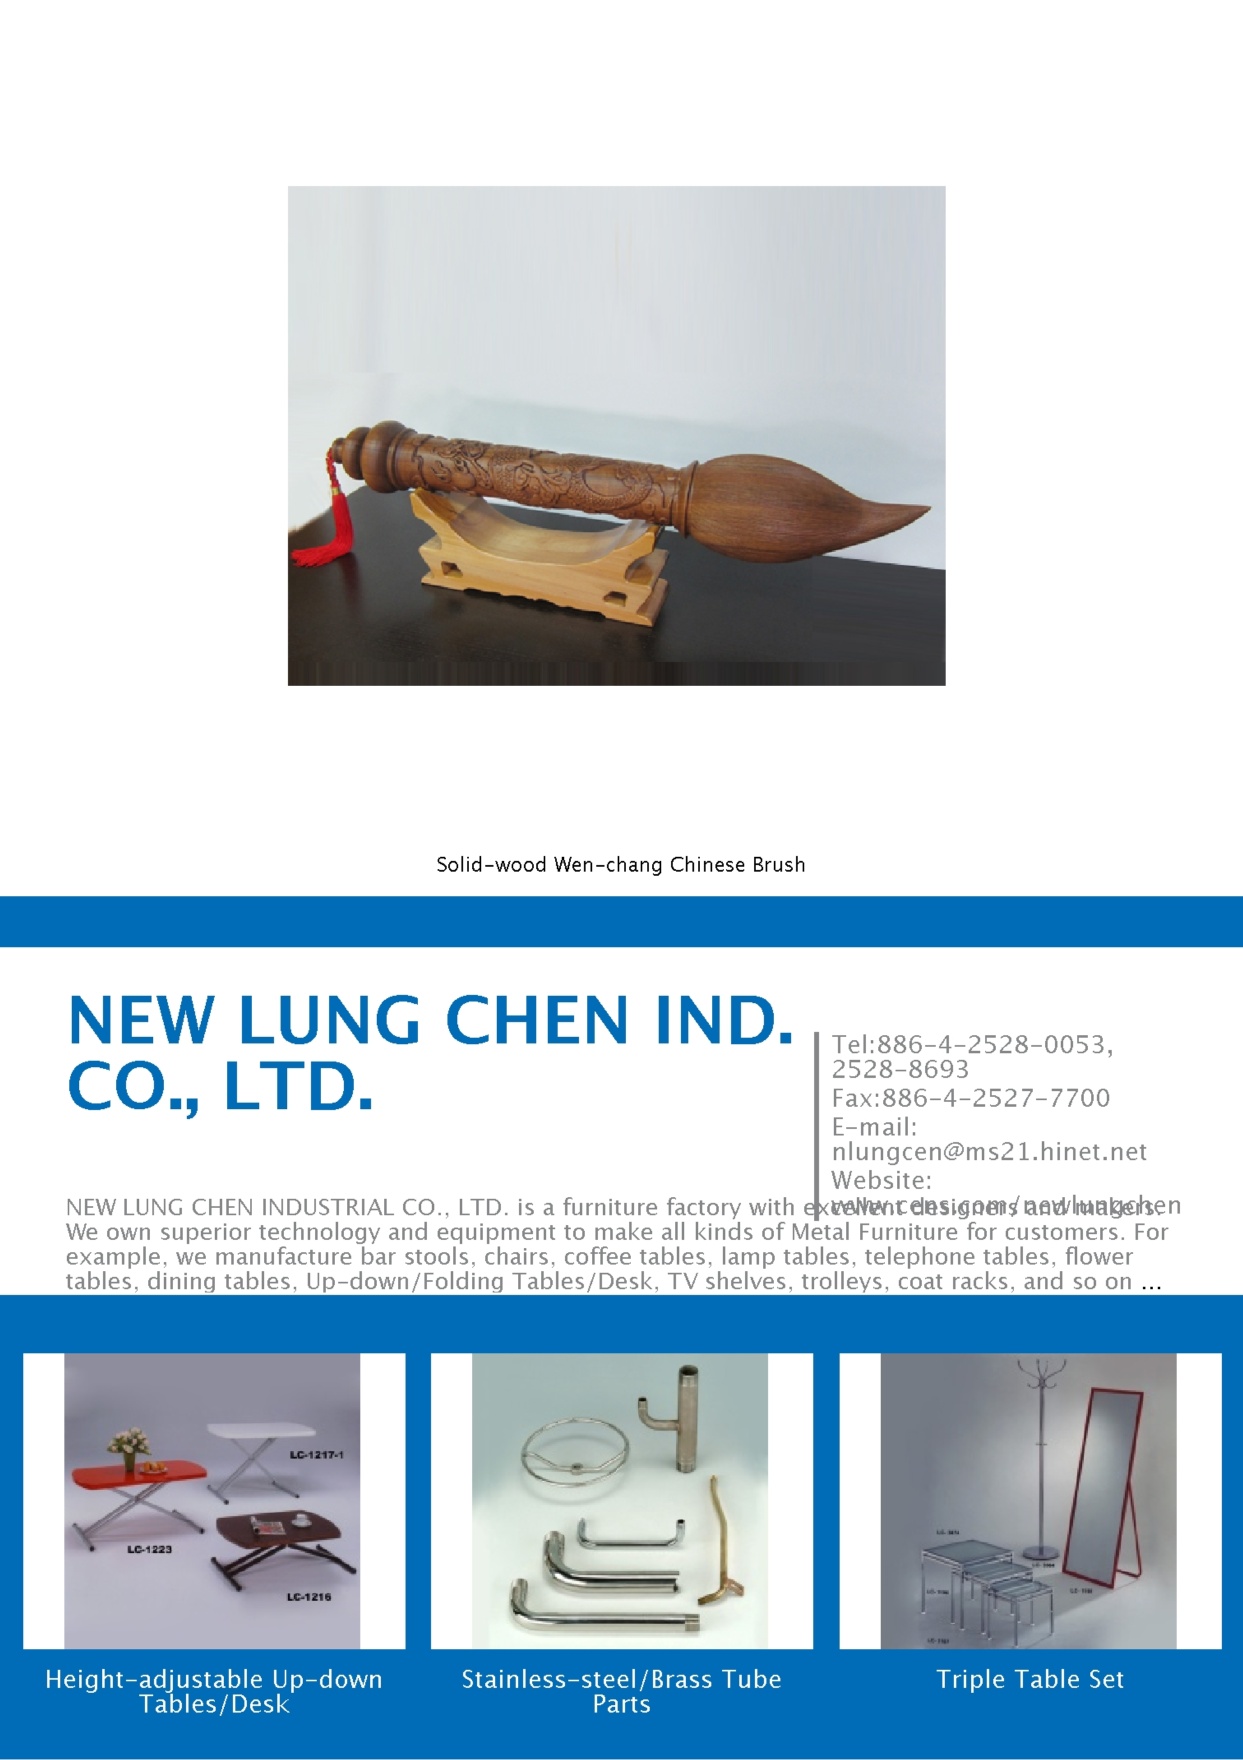 NEW LUNG CHEN IND. CO., LTD.